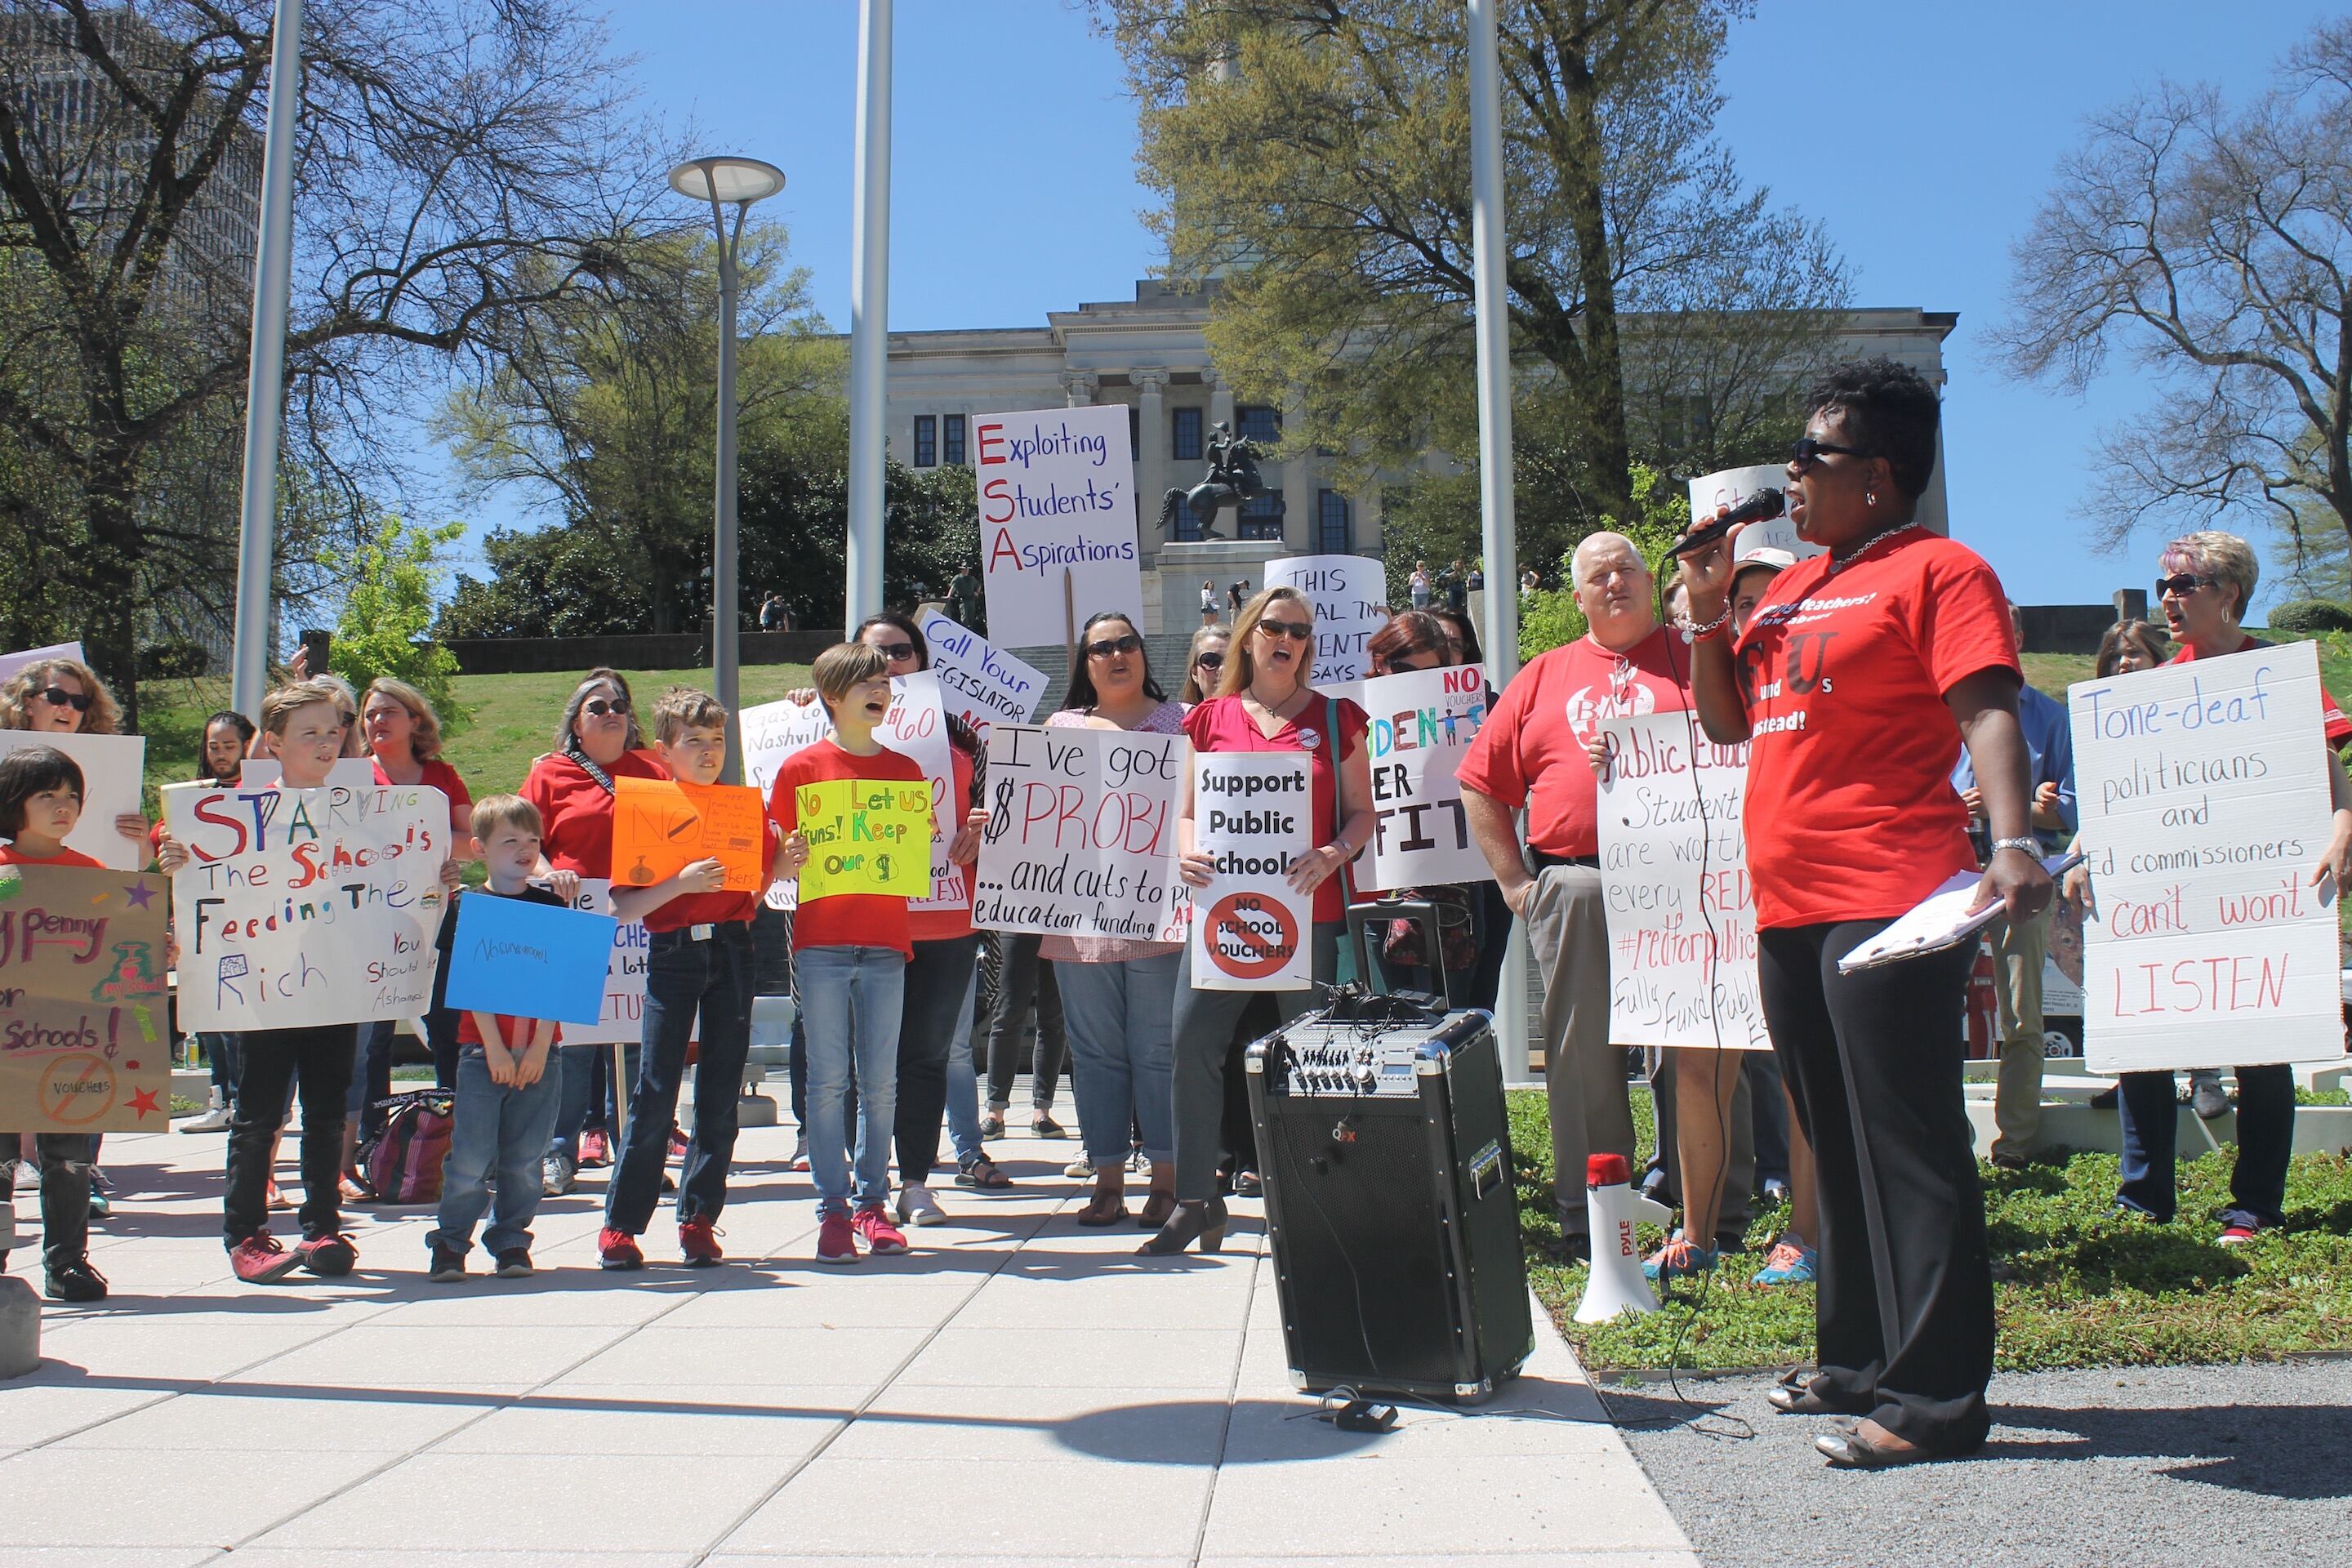 Tikeila Rucker, president of the United Education Association of Shelby County, speaks during the anti-voucher rally.